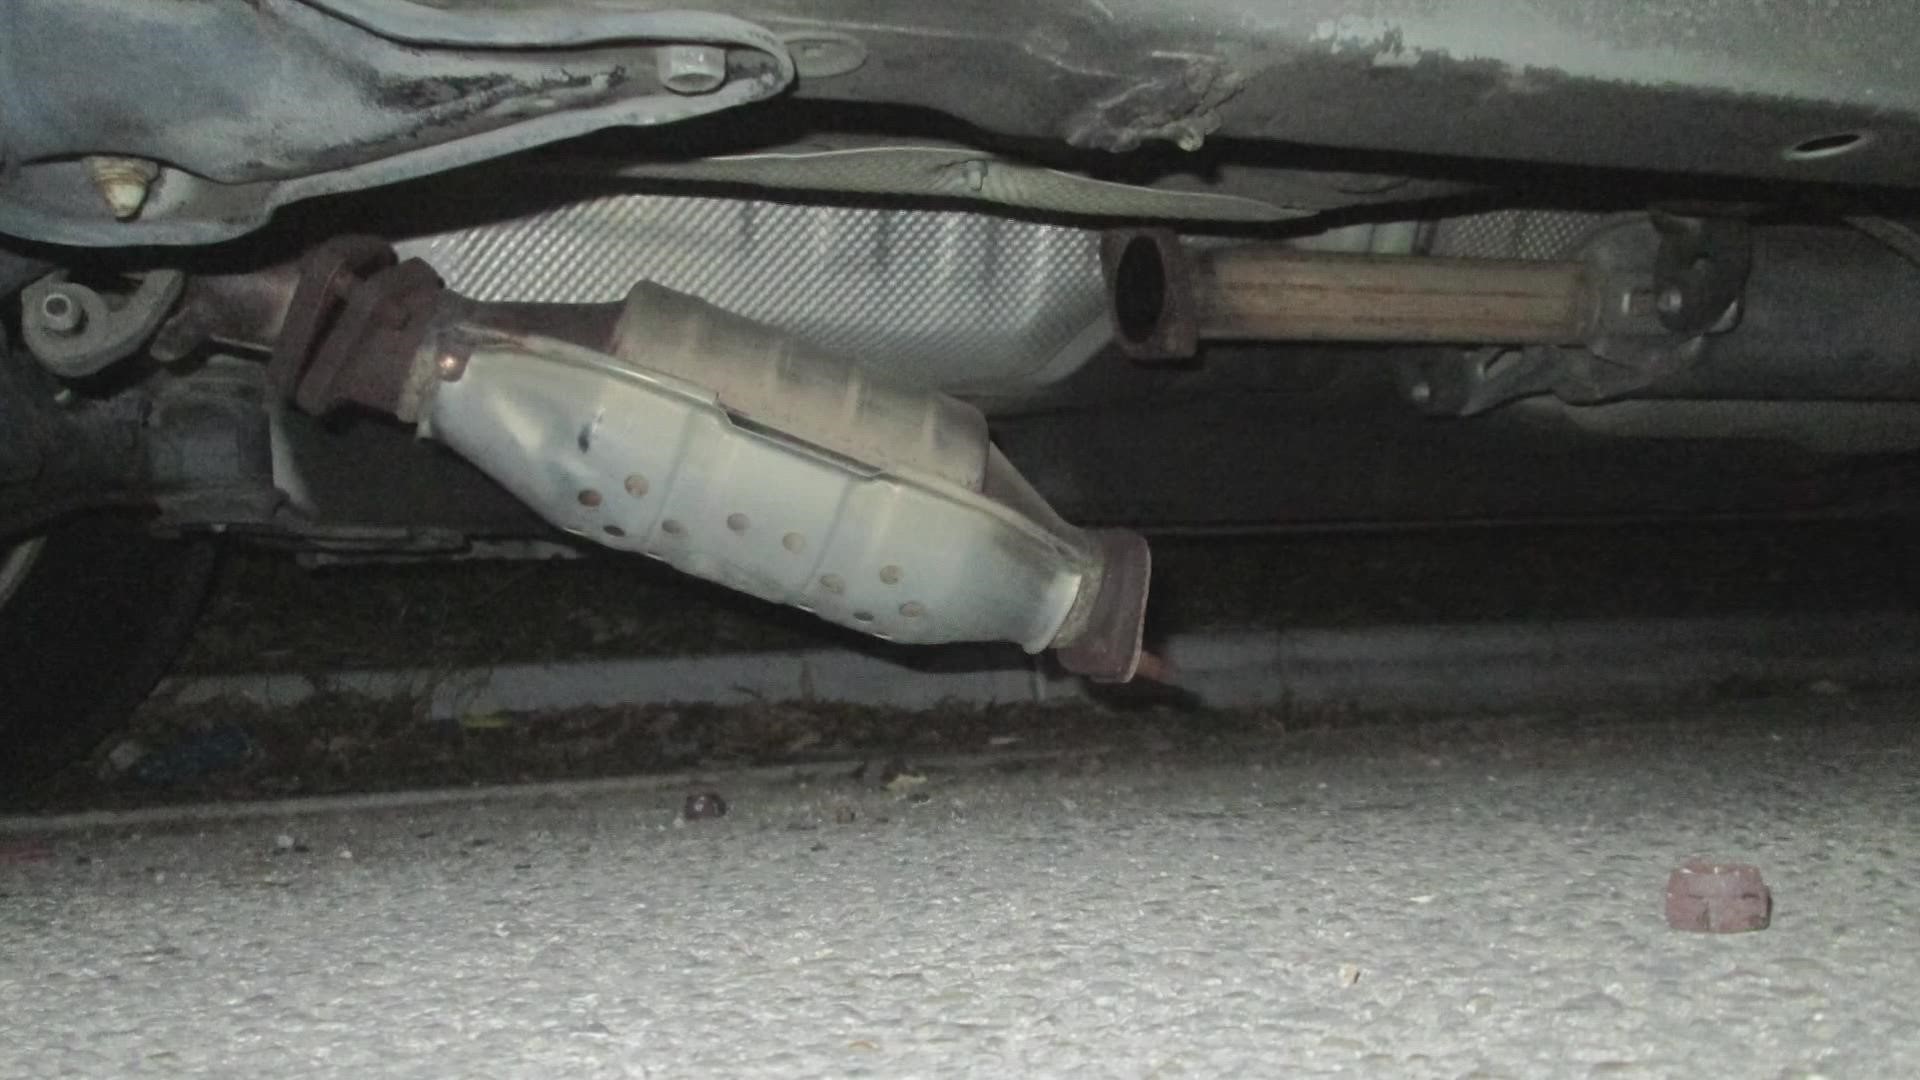 White Settlement Police Chief Christopher Cook told WFAA catalytic converter thefts are becoming more common, but catching someone in the act is rare.